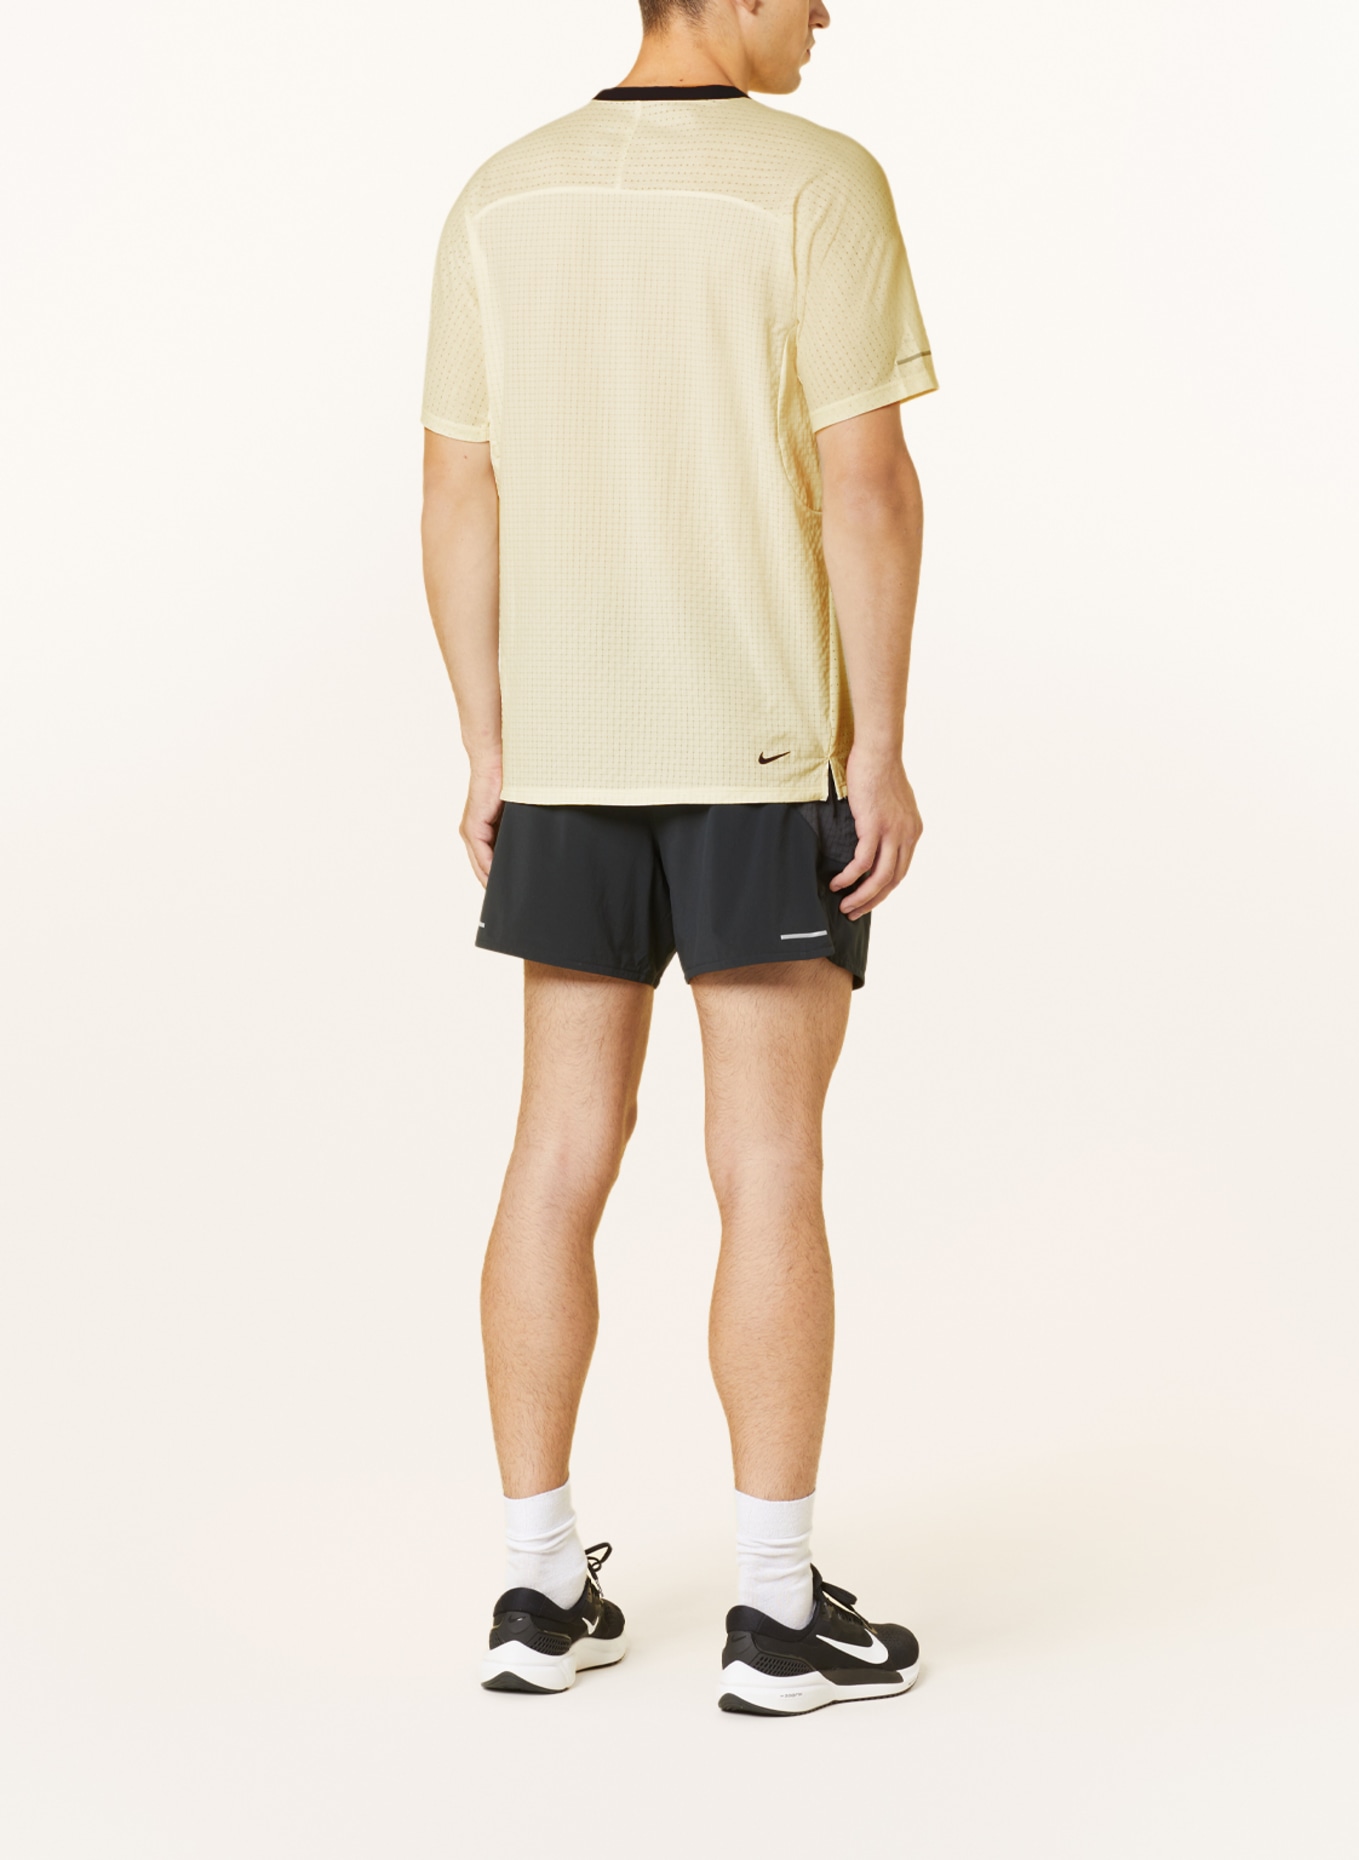 Nike Running shirt DRI-FIT TRAIL SOLAR CHASE, Color: LIGHT YELLOW (Image 3)